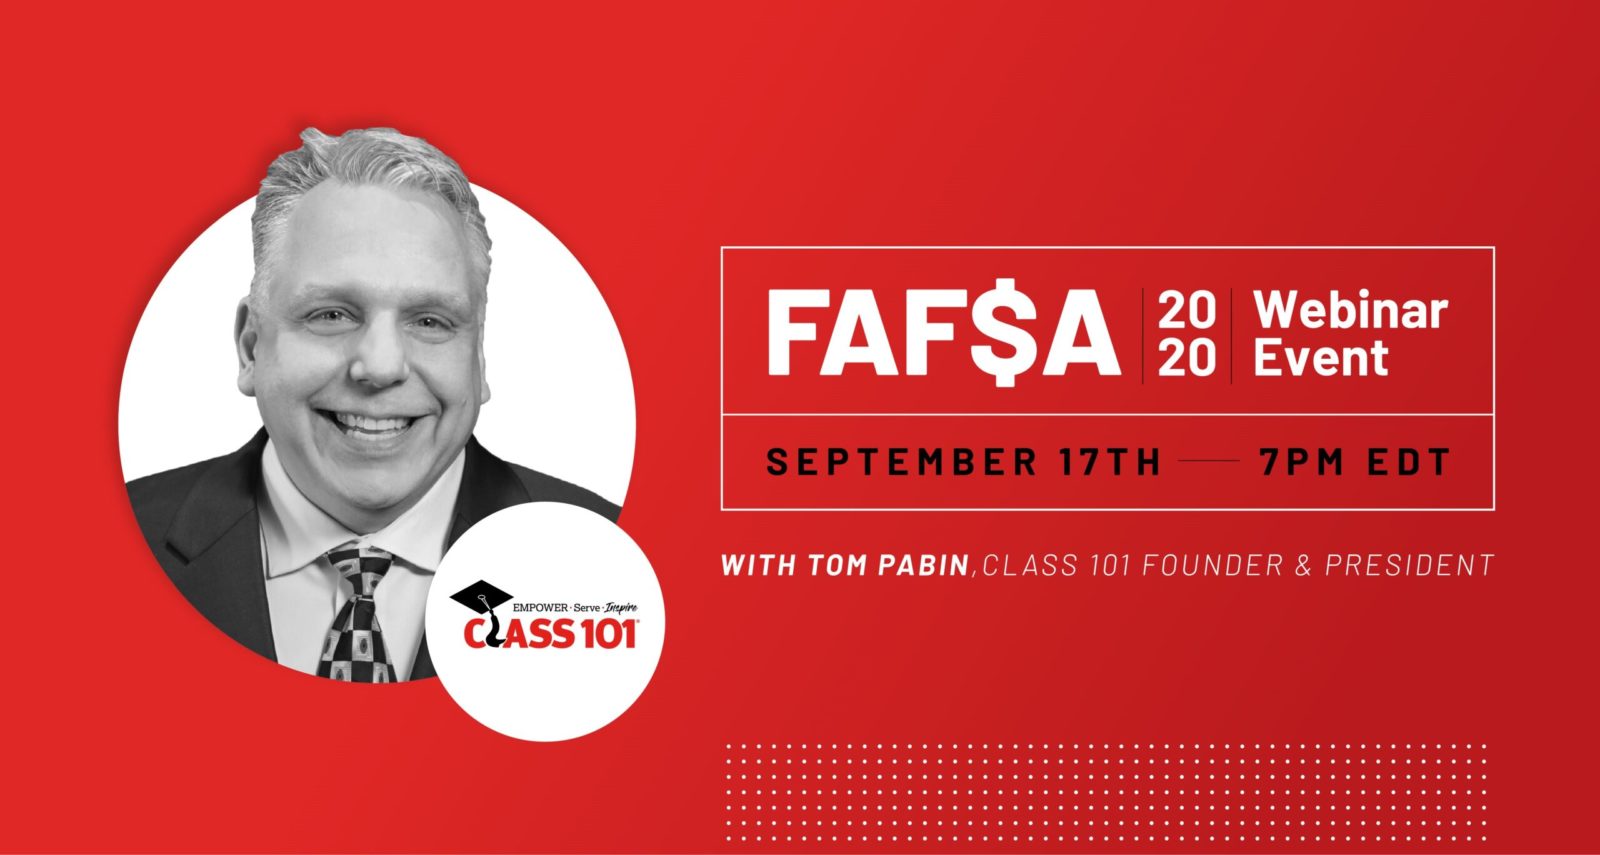 FAFSA Student Aid Webinar for Students